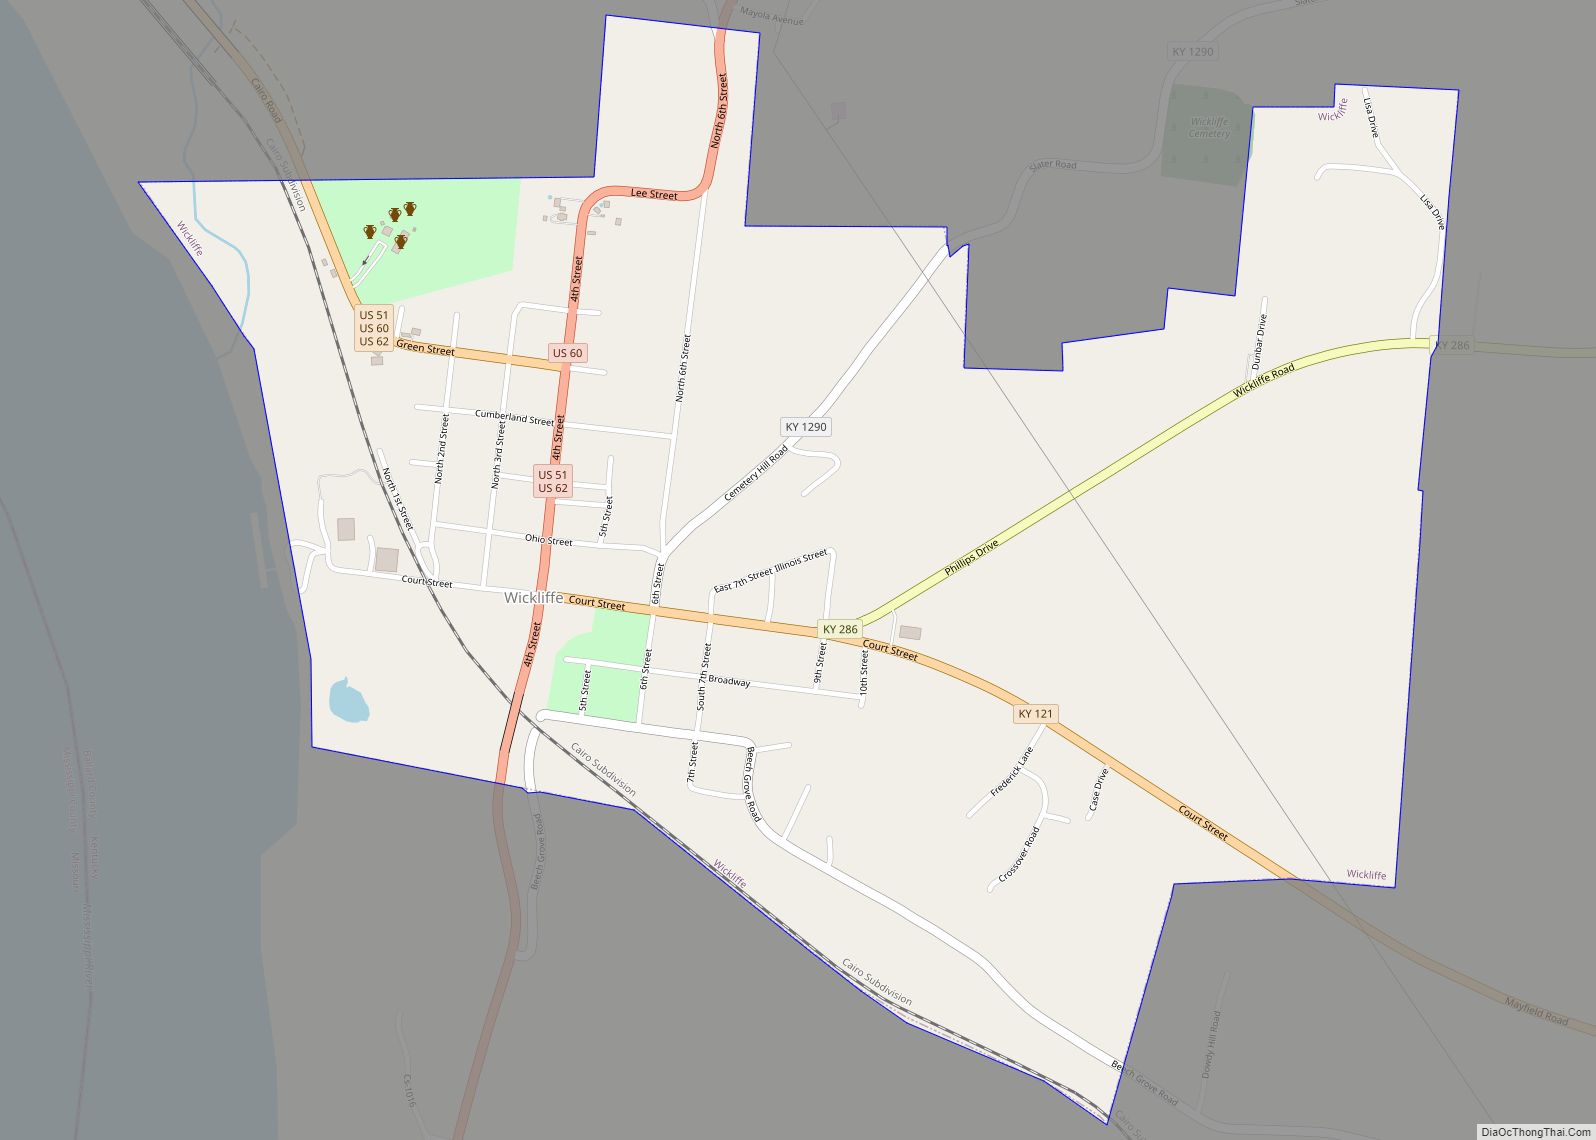 Map of Wickliffe city